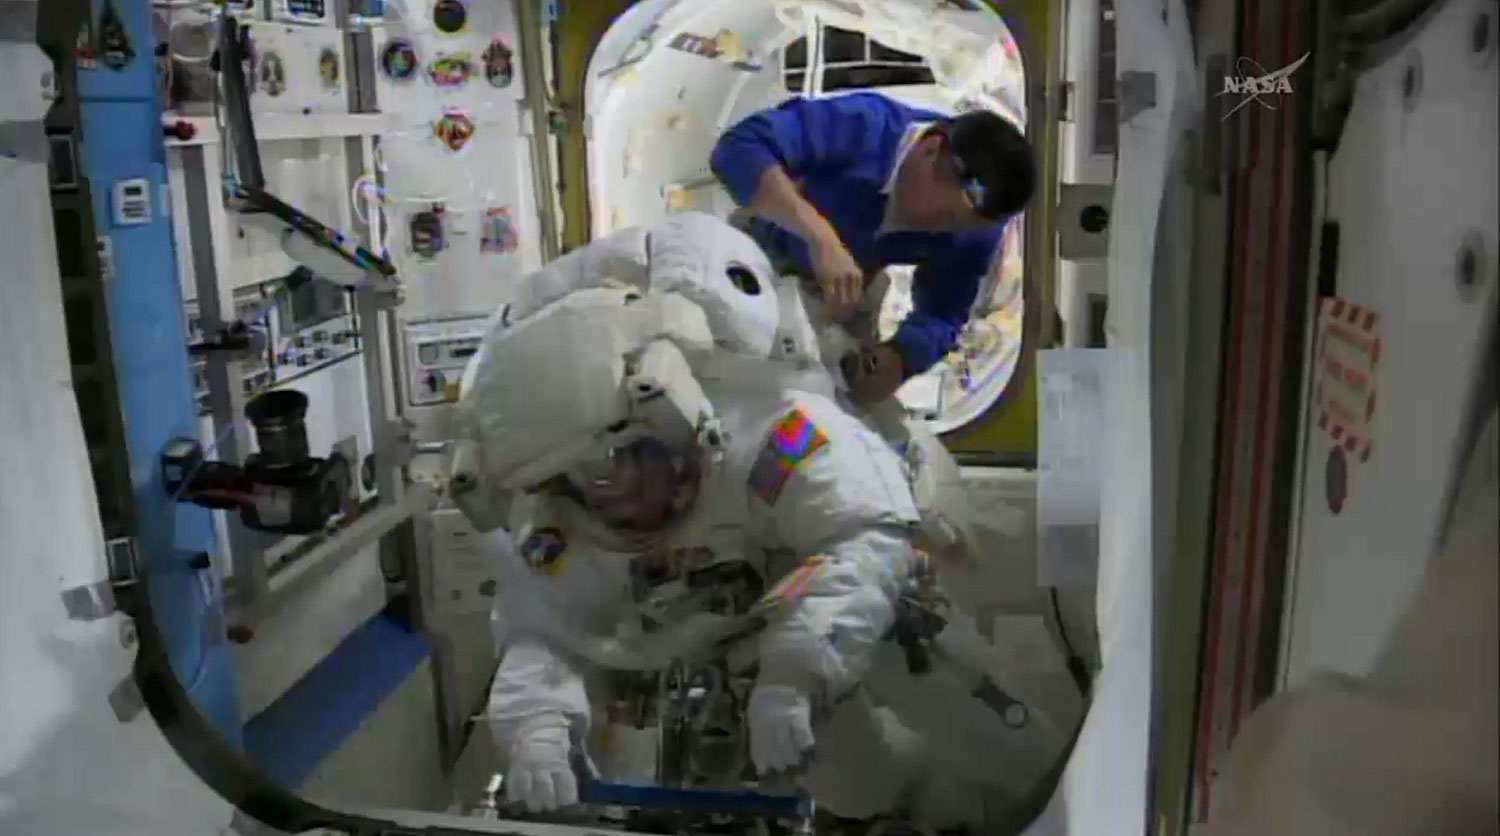 This April 23, 2014 NASA TV image shows International Space Station(ISS) astronauts Koichi Wakata of Japan as he helps Rick Mastracchio of the US(front) prepare for a spacewalk to install a backup computer that failed earlier this month.